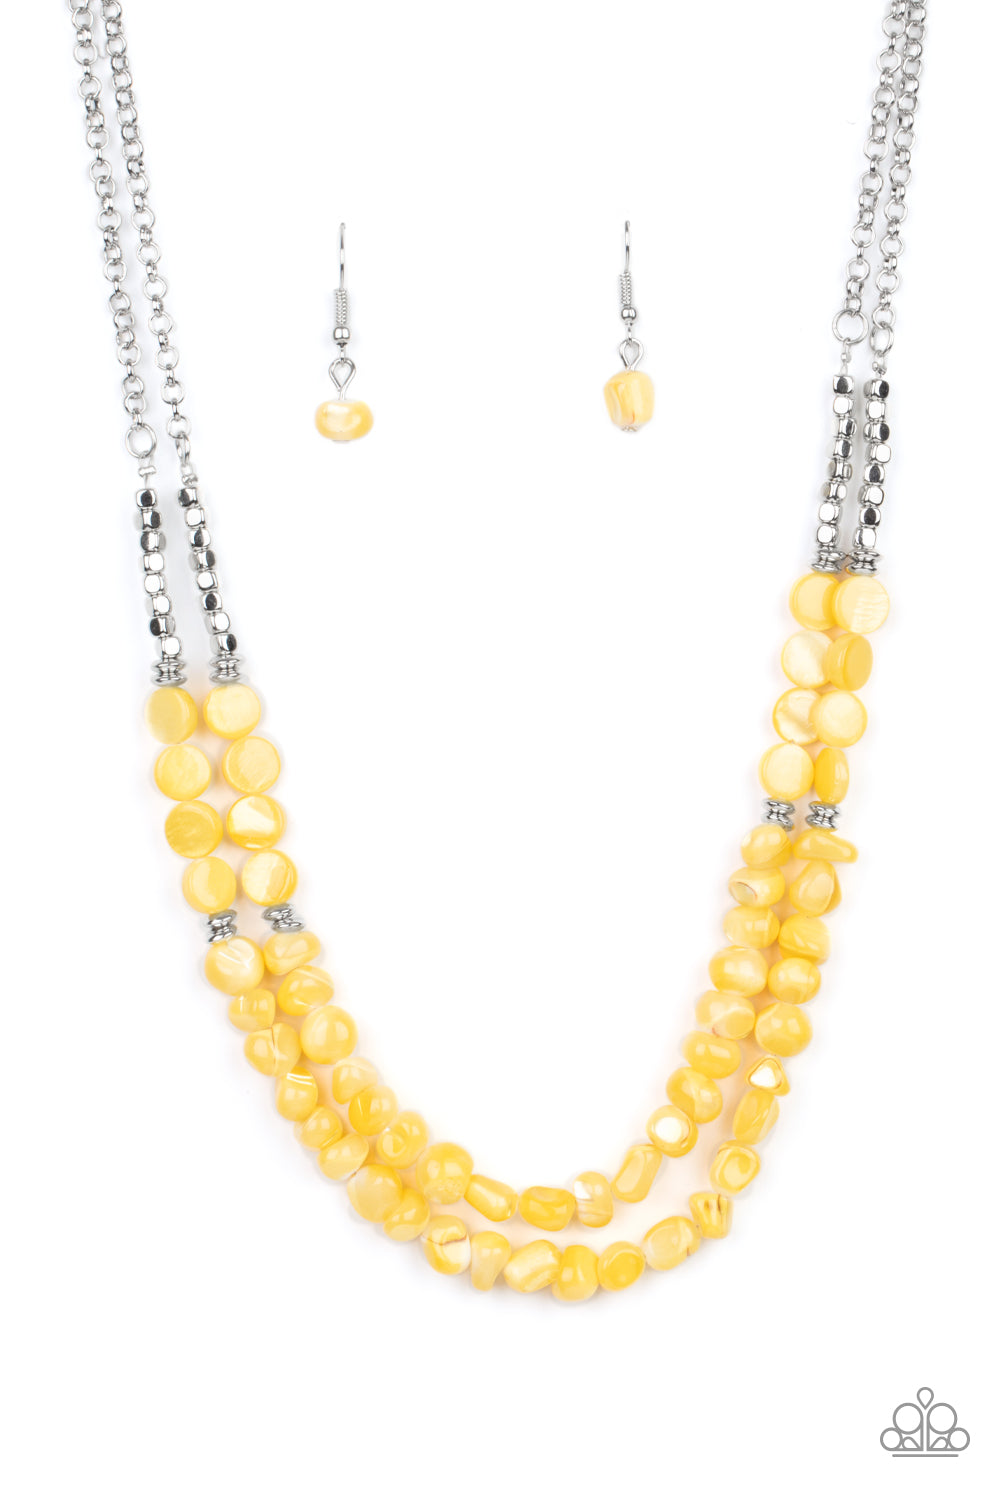 dainty silver cube and round beaded accents, yellow shell-like beads